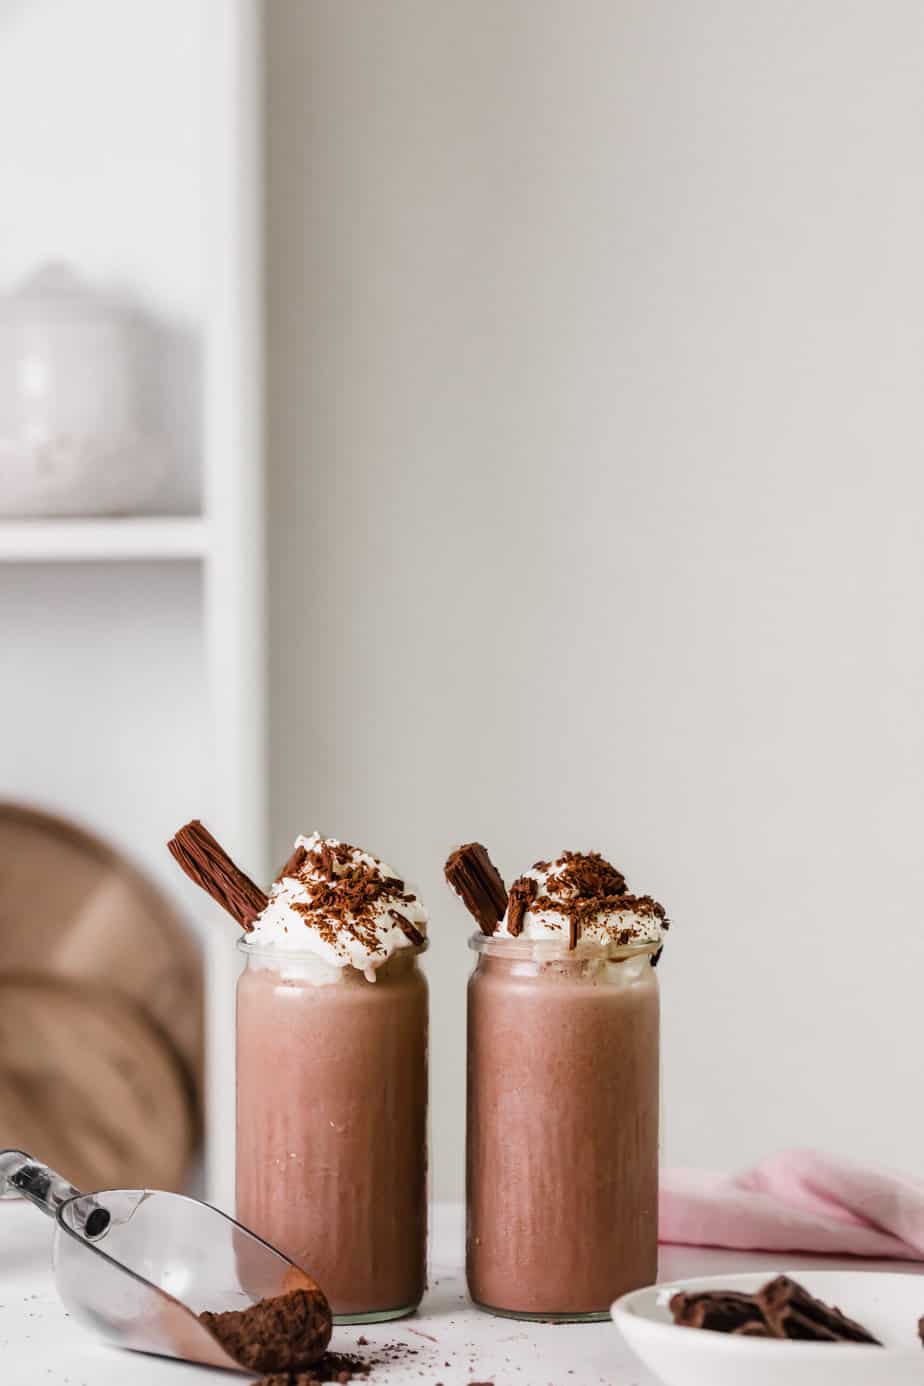 Two chocolate milkshakes in serving glasses with whipped cream and chocolate